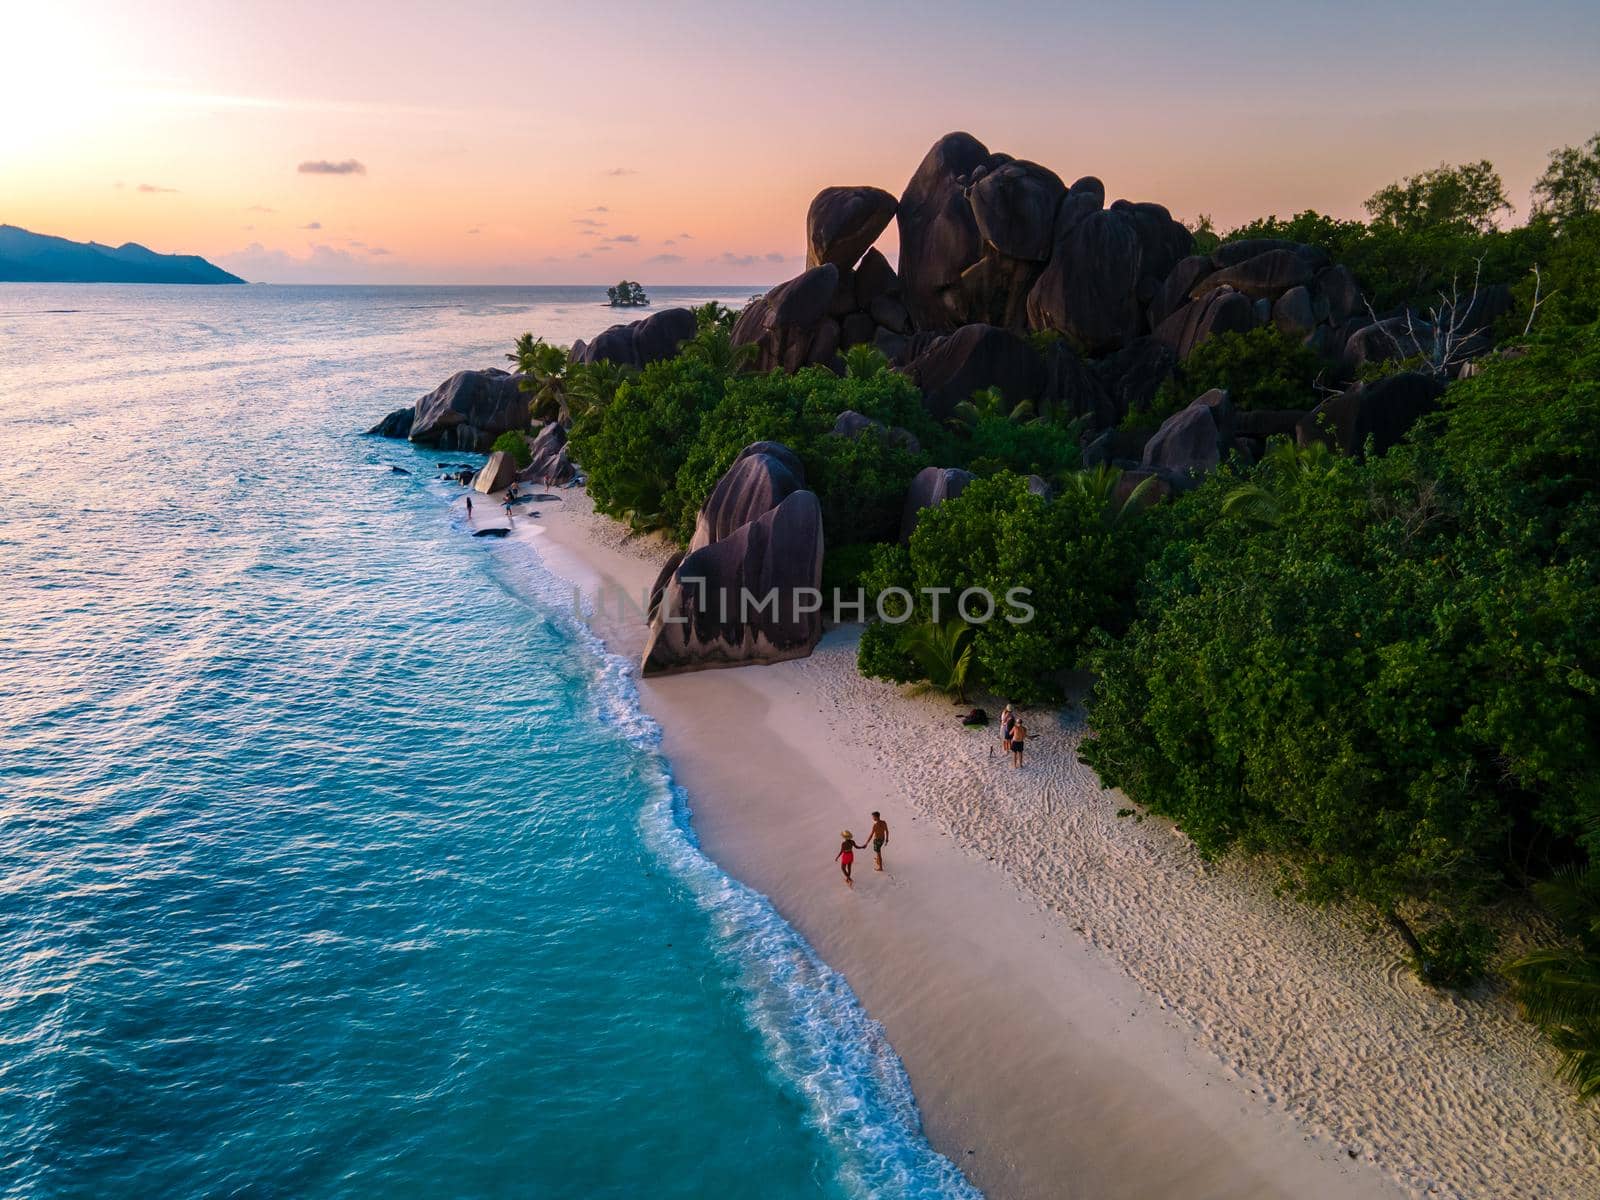 Anse Source d'Argent, La Digue Seychelles, young couple men and woman on a tropical beach during a luxury vacation in the Seychelles. Tropical beach Anse Source d'Argent, La Digue Seychelles by fokkebok